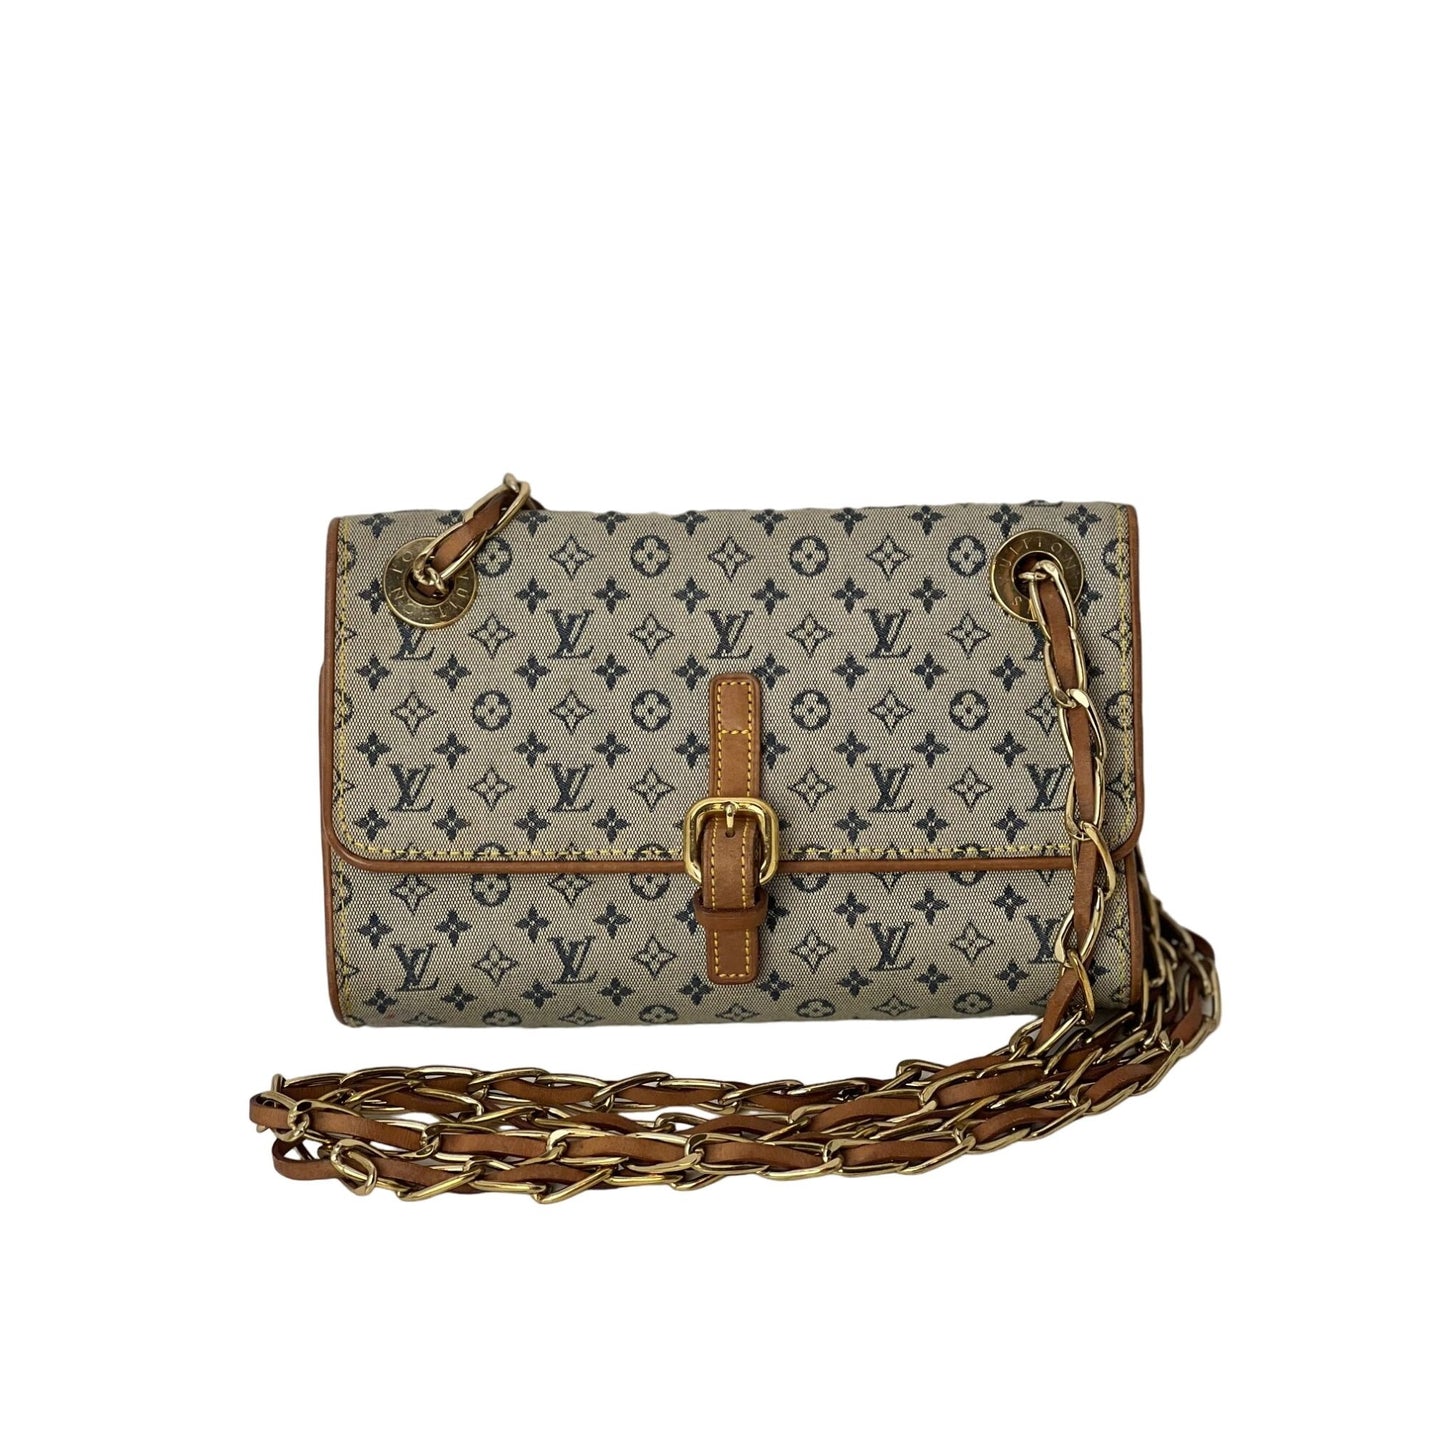 Preowned Keepall bandouliere 50 bag Louis Vuitton  Roadness